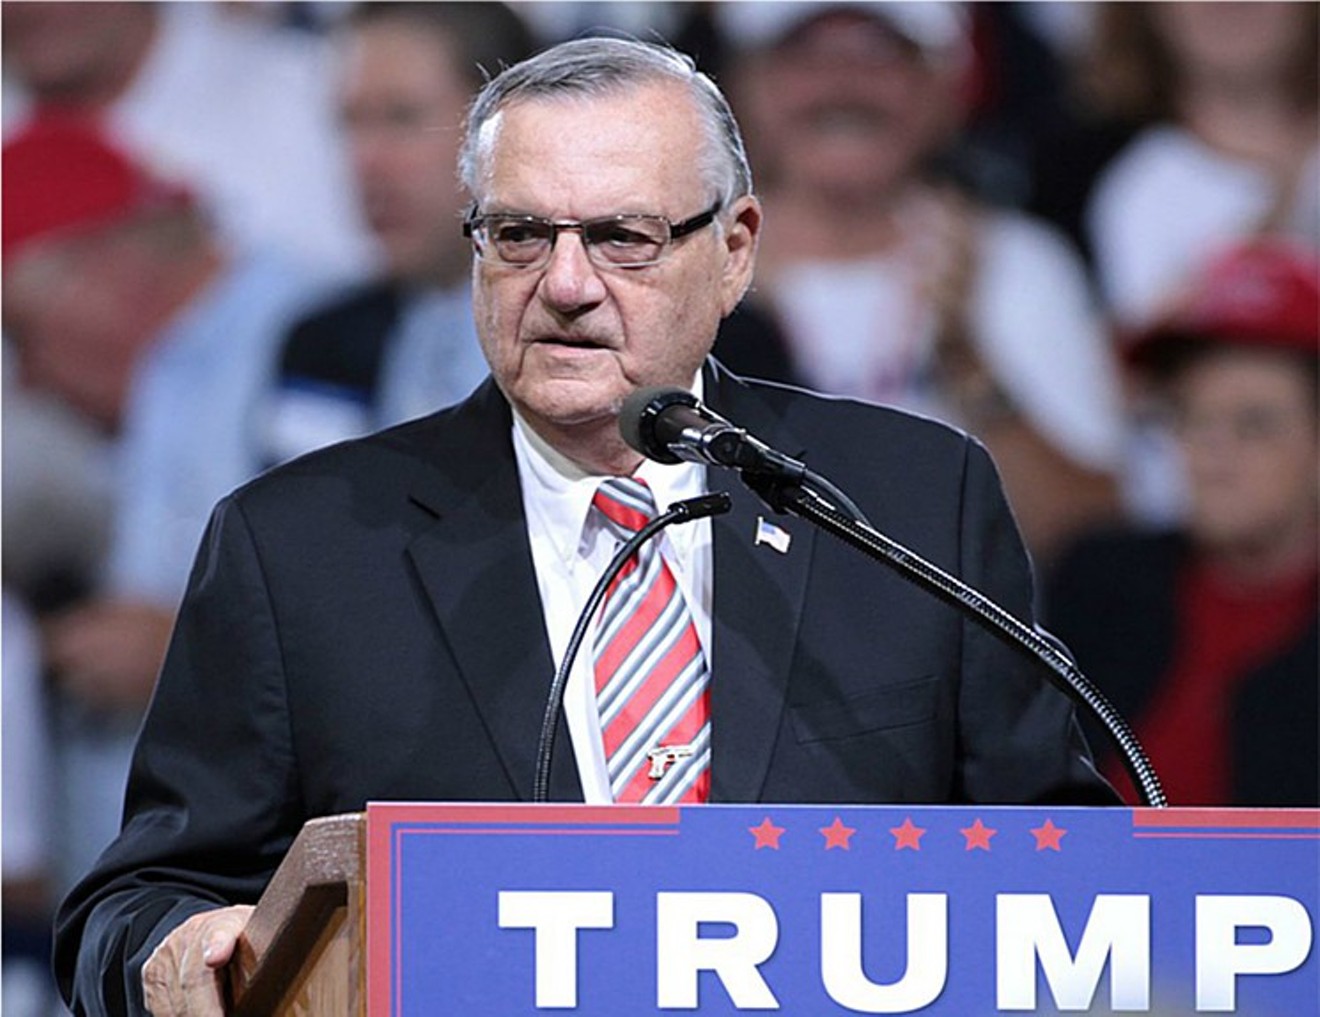 Joe Arpaio lost another election on Tuesday. Will he stay down this time?